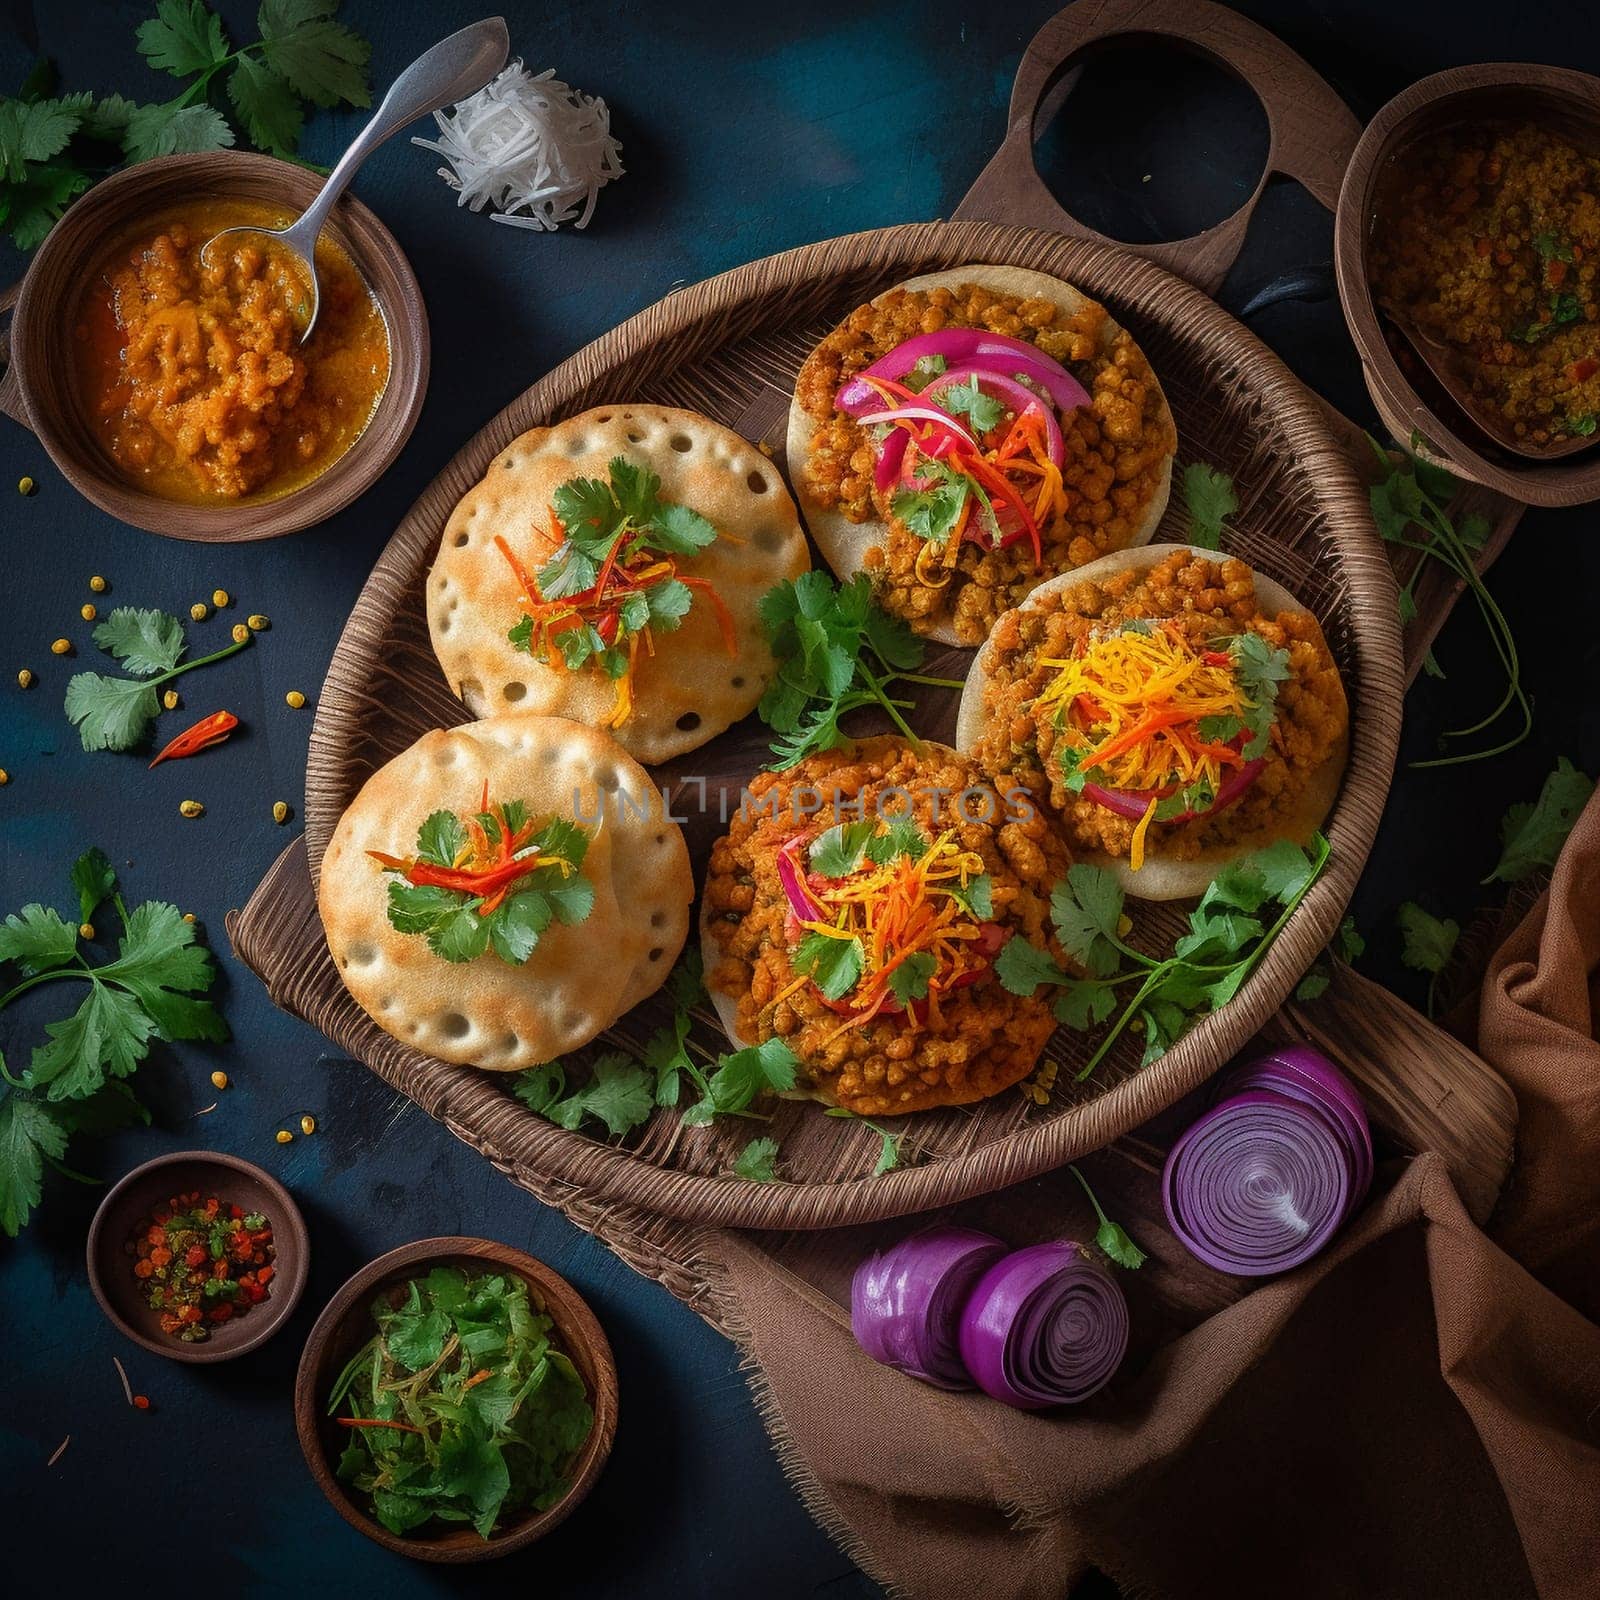 Experience the taste of Mauritius with a plate of freshly made Dholl Puri, a flatbread filled with spiced lentils and served with chutney. This top-down image showcases the variety of colorful ingredients and their vivid colors, arranged around the main dish which is served on a traditional Mauritian plate or mat, evoking a sense of authenticity and cultural significance. Smaller bowls containing chutney, pickles, and other condiments commonly used in Mauritian cuisine add to the visual appeal of the scene. Utilizing natural, indirect daylight streaming in from one side, the lighting illuminates the dish and casts soft shadows that accentuate the textures and colors of the ingredients. The image conveys a sense of warmth, comfort, and tradition, inviting the viewer to enjoy a simple and satisfying meal. Emphasize the fluffy and slightly chewy texture of the Dholl Puri, as well as the flavors and aromas of the spiced lentil filling. Traditional Mauritian ingredients such as cumin, coriander, and ginger add more visual interest and showcase the unique flavors of the dish.